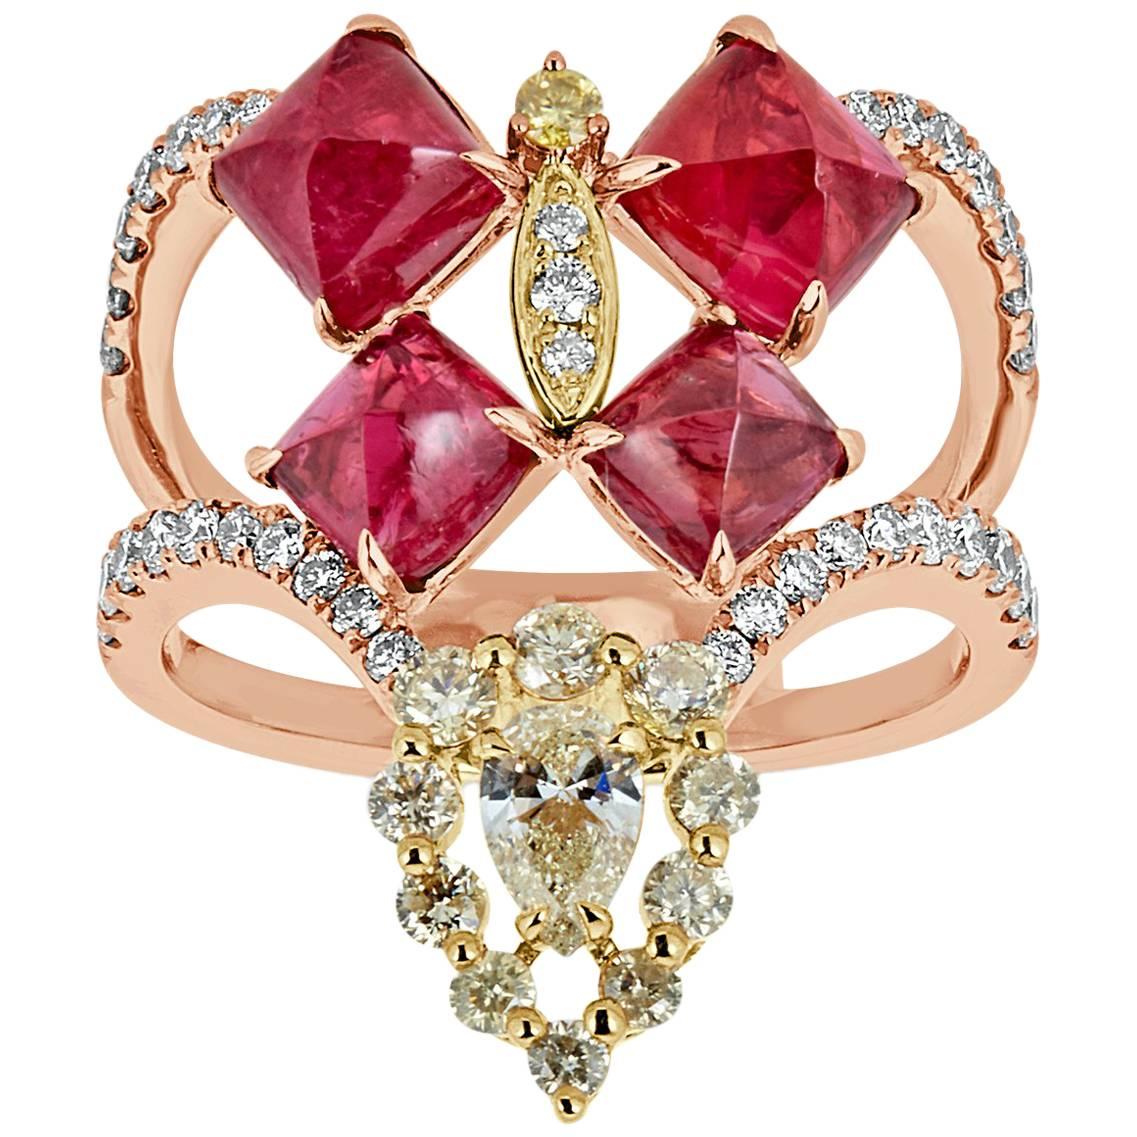 Red Spinel Yellow and White Diamond Ring For Sale